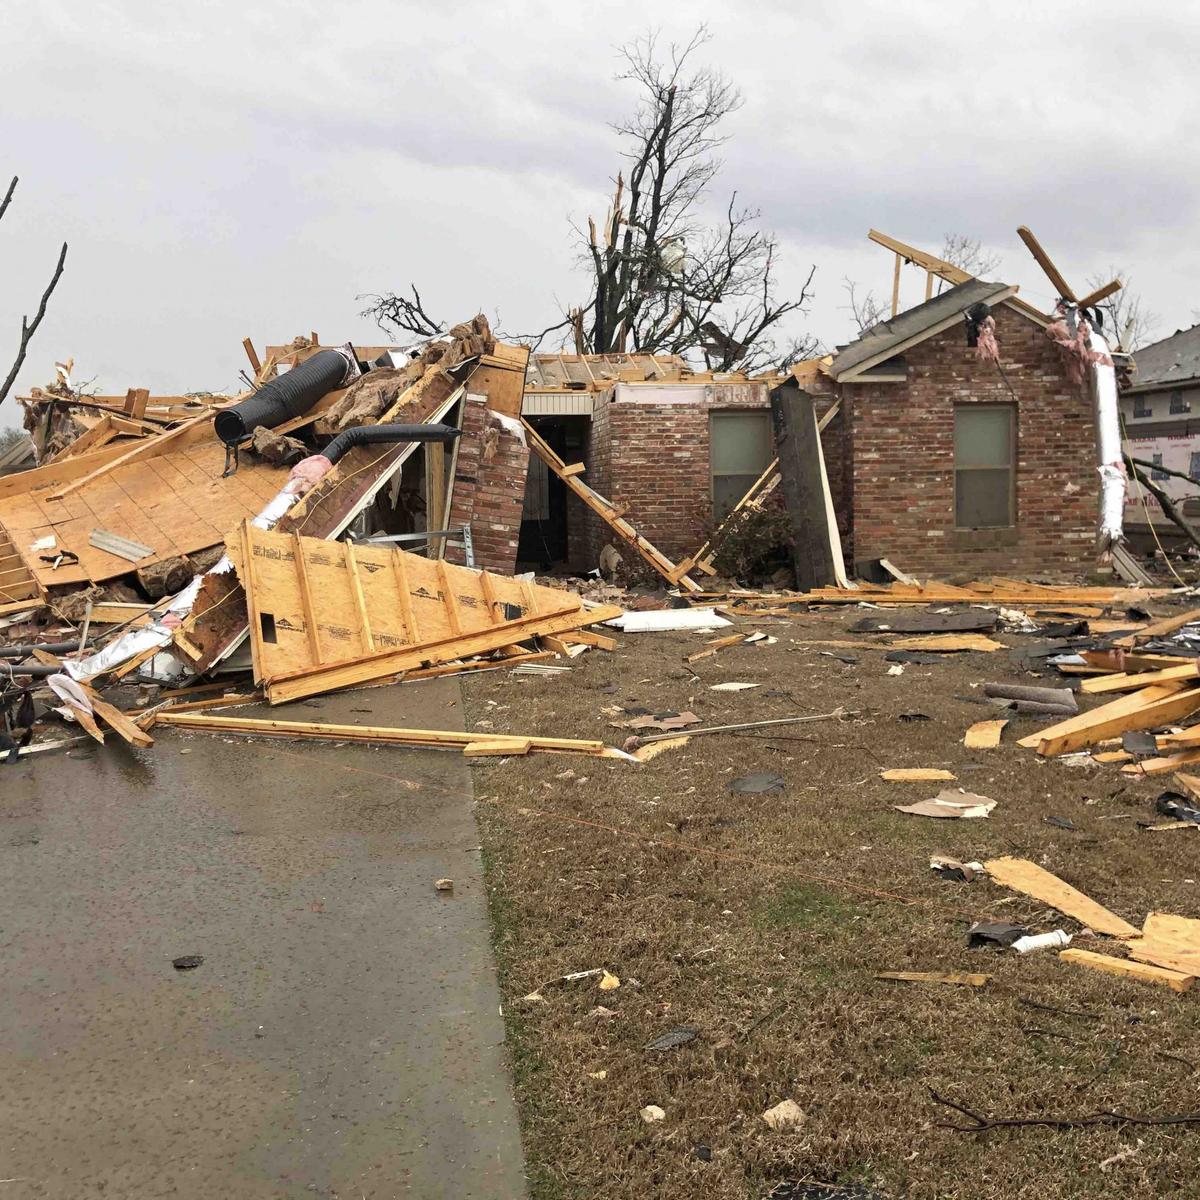 The Burks family home that was destroyed in the tornado. (Courtesy of Evan Clower/GoFundMe)